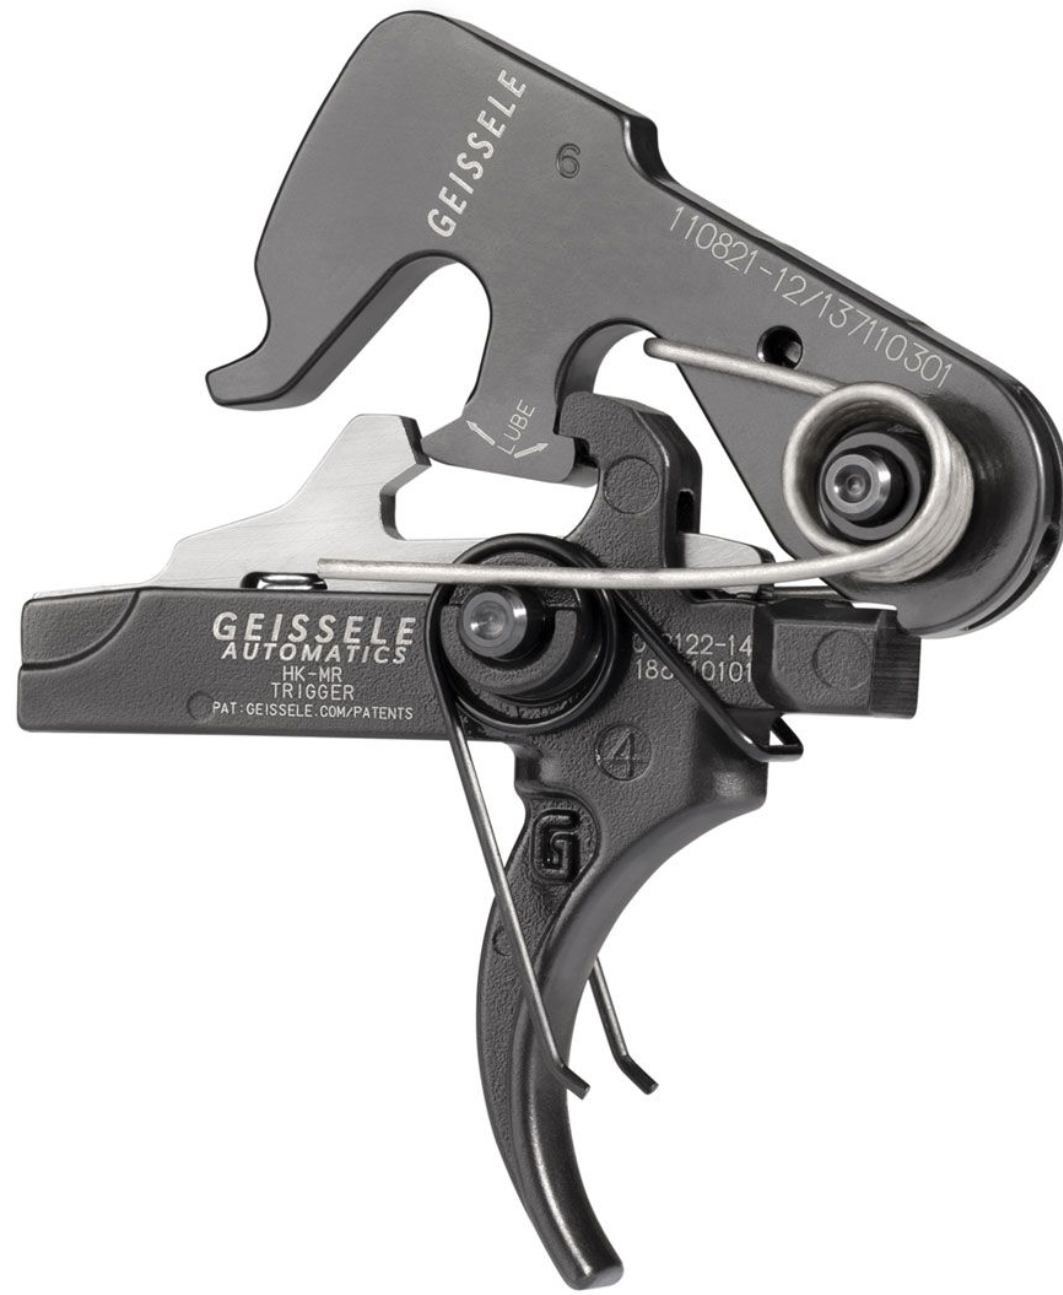 Geissele Trigger: The ultimate upgrade for your rifle - Ammo master - Ammo Depot USA